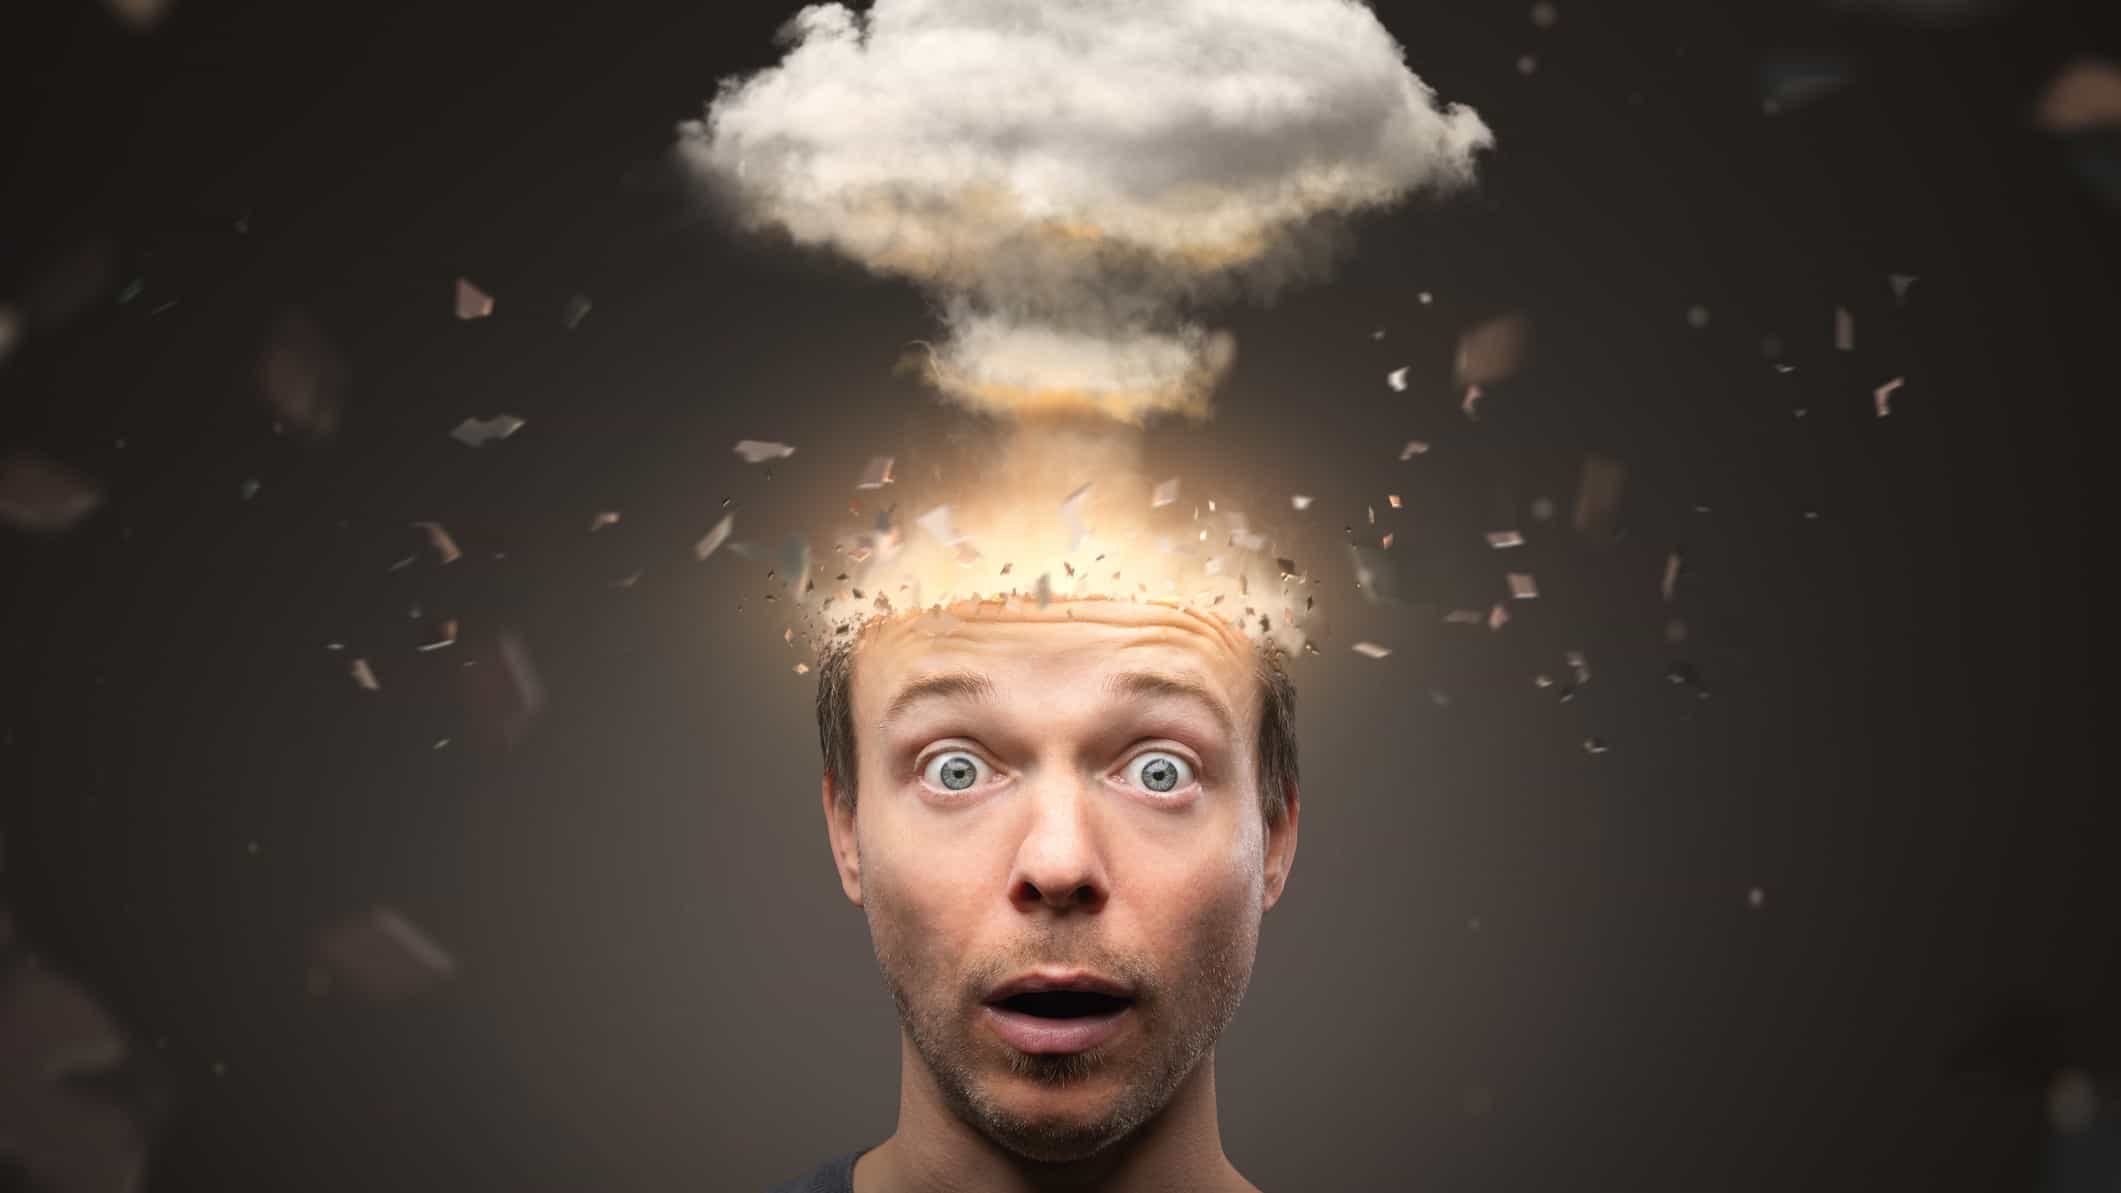 stylised image of exploding cloud coming out of top of a man's head representing exploding share price